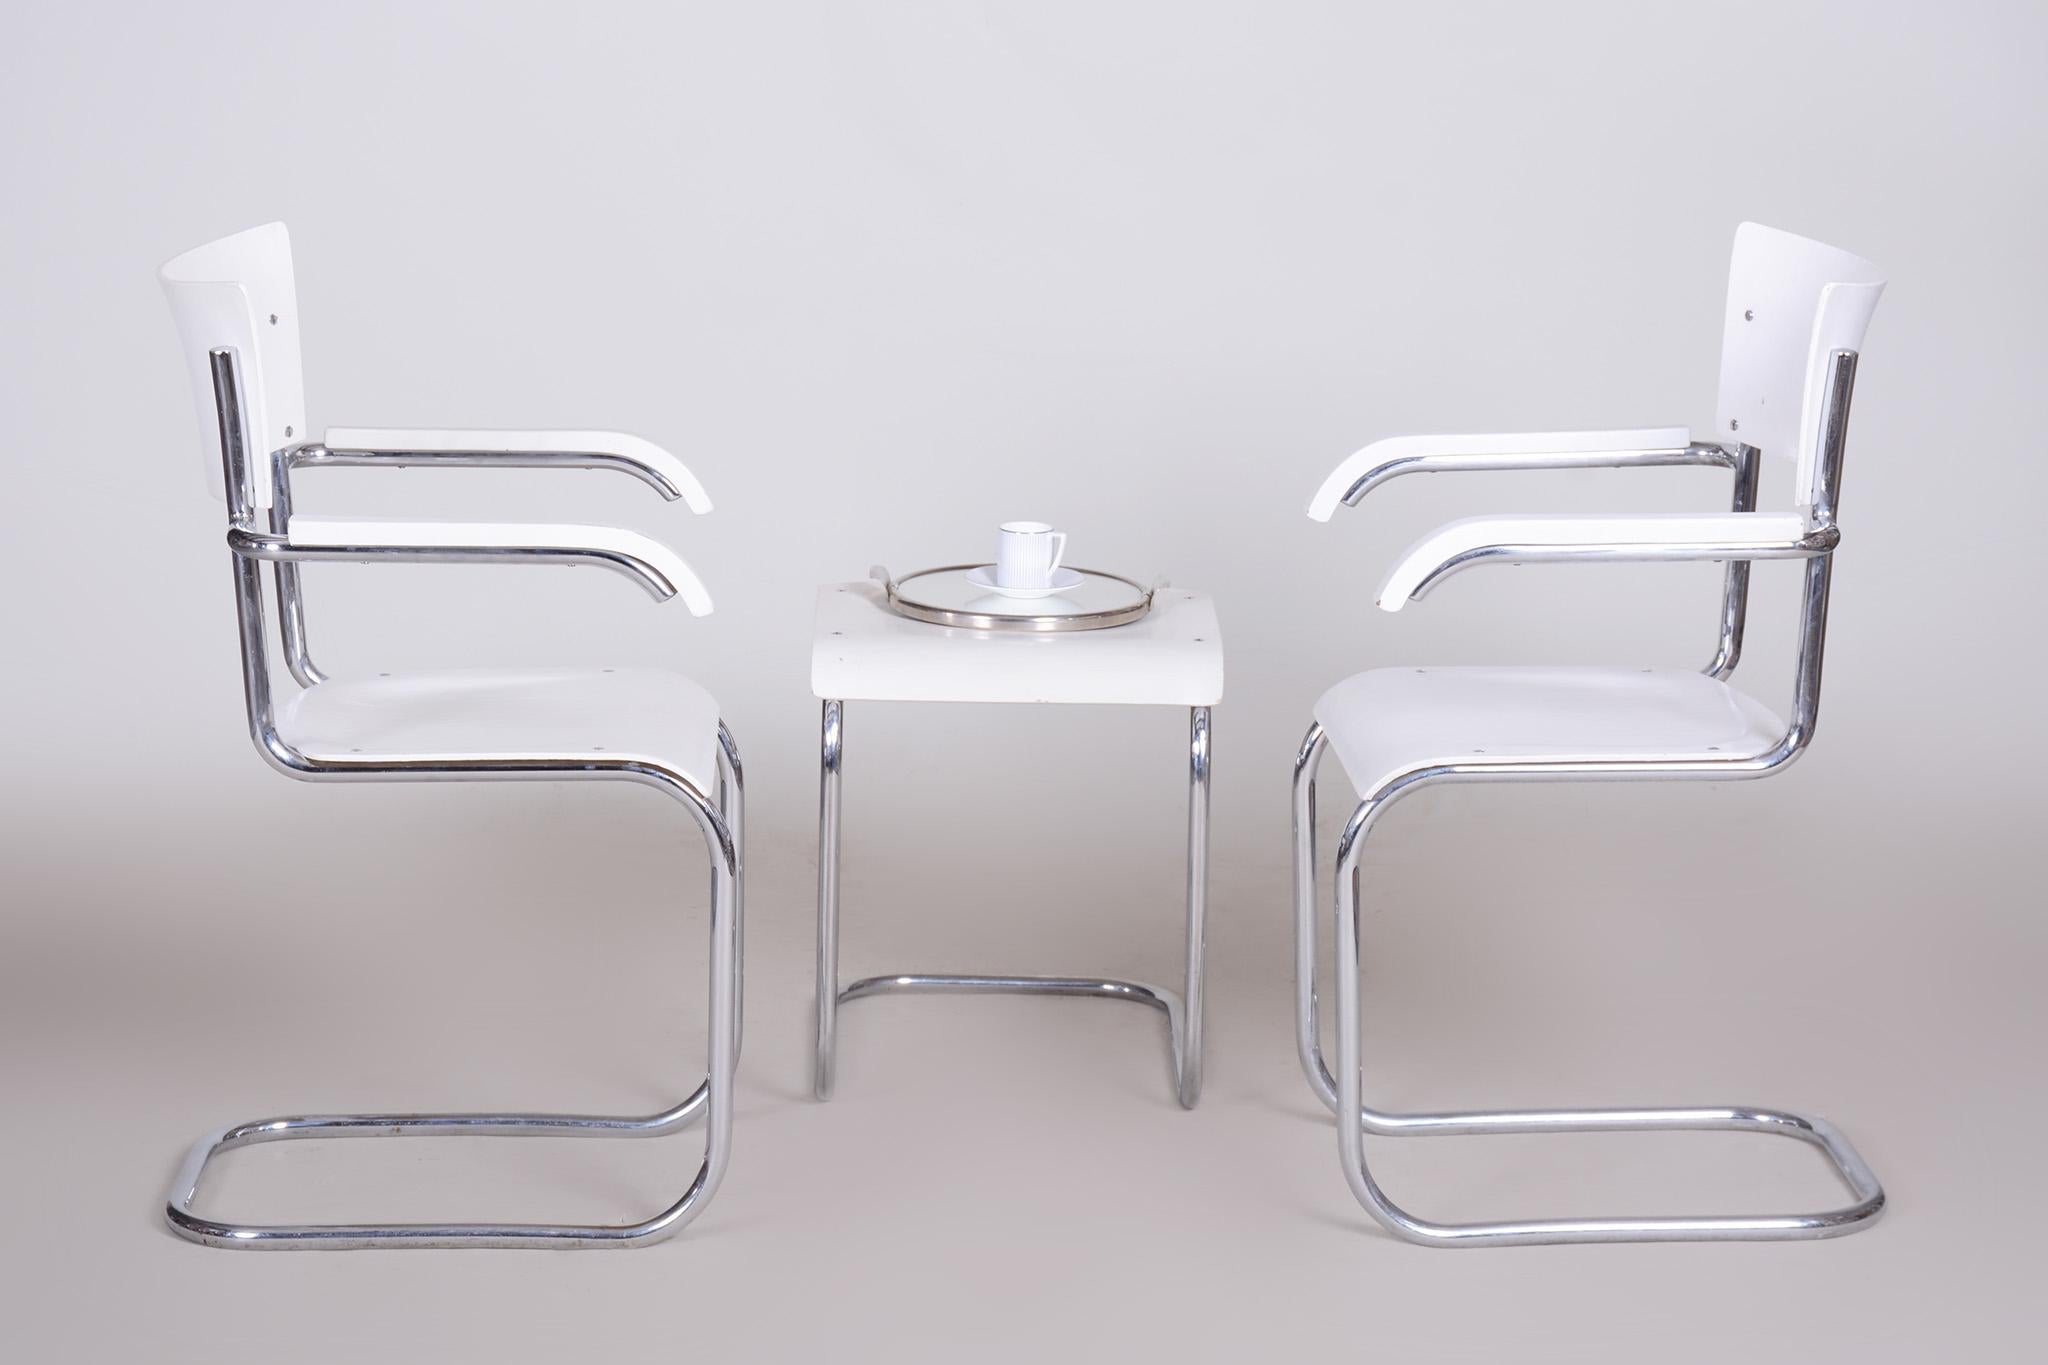 Pair of Original White Mucke Melder Chairs and Stool Made in 1930s Czechia For Sale 8